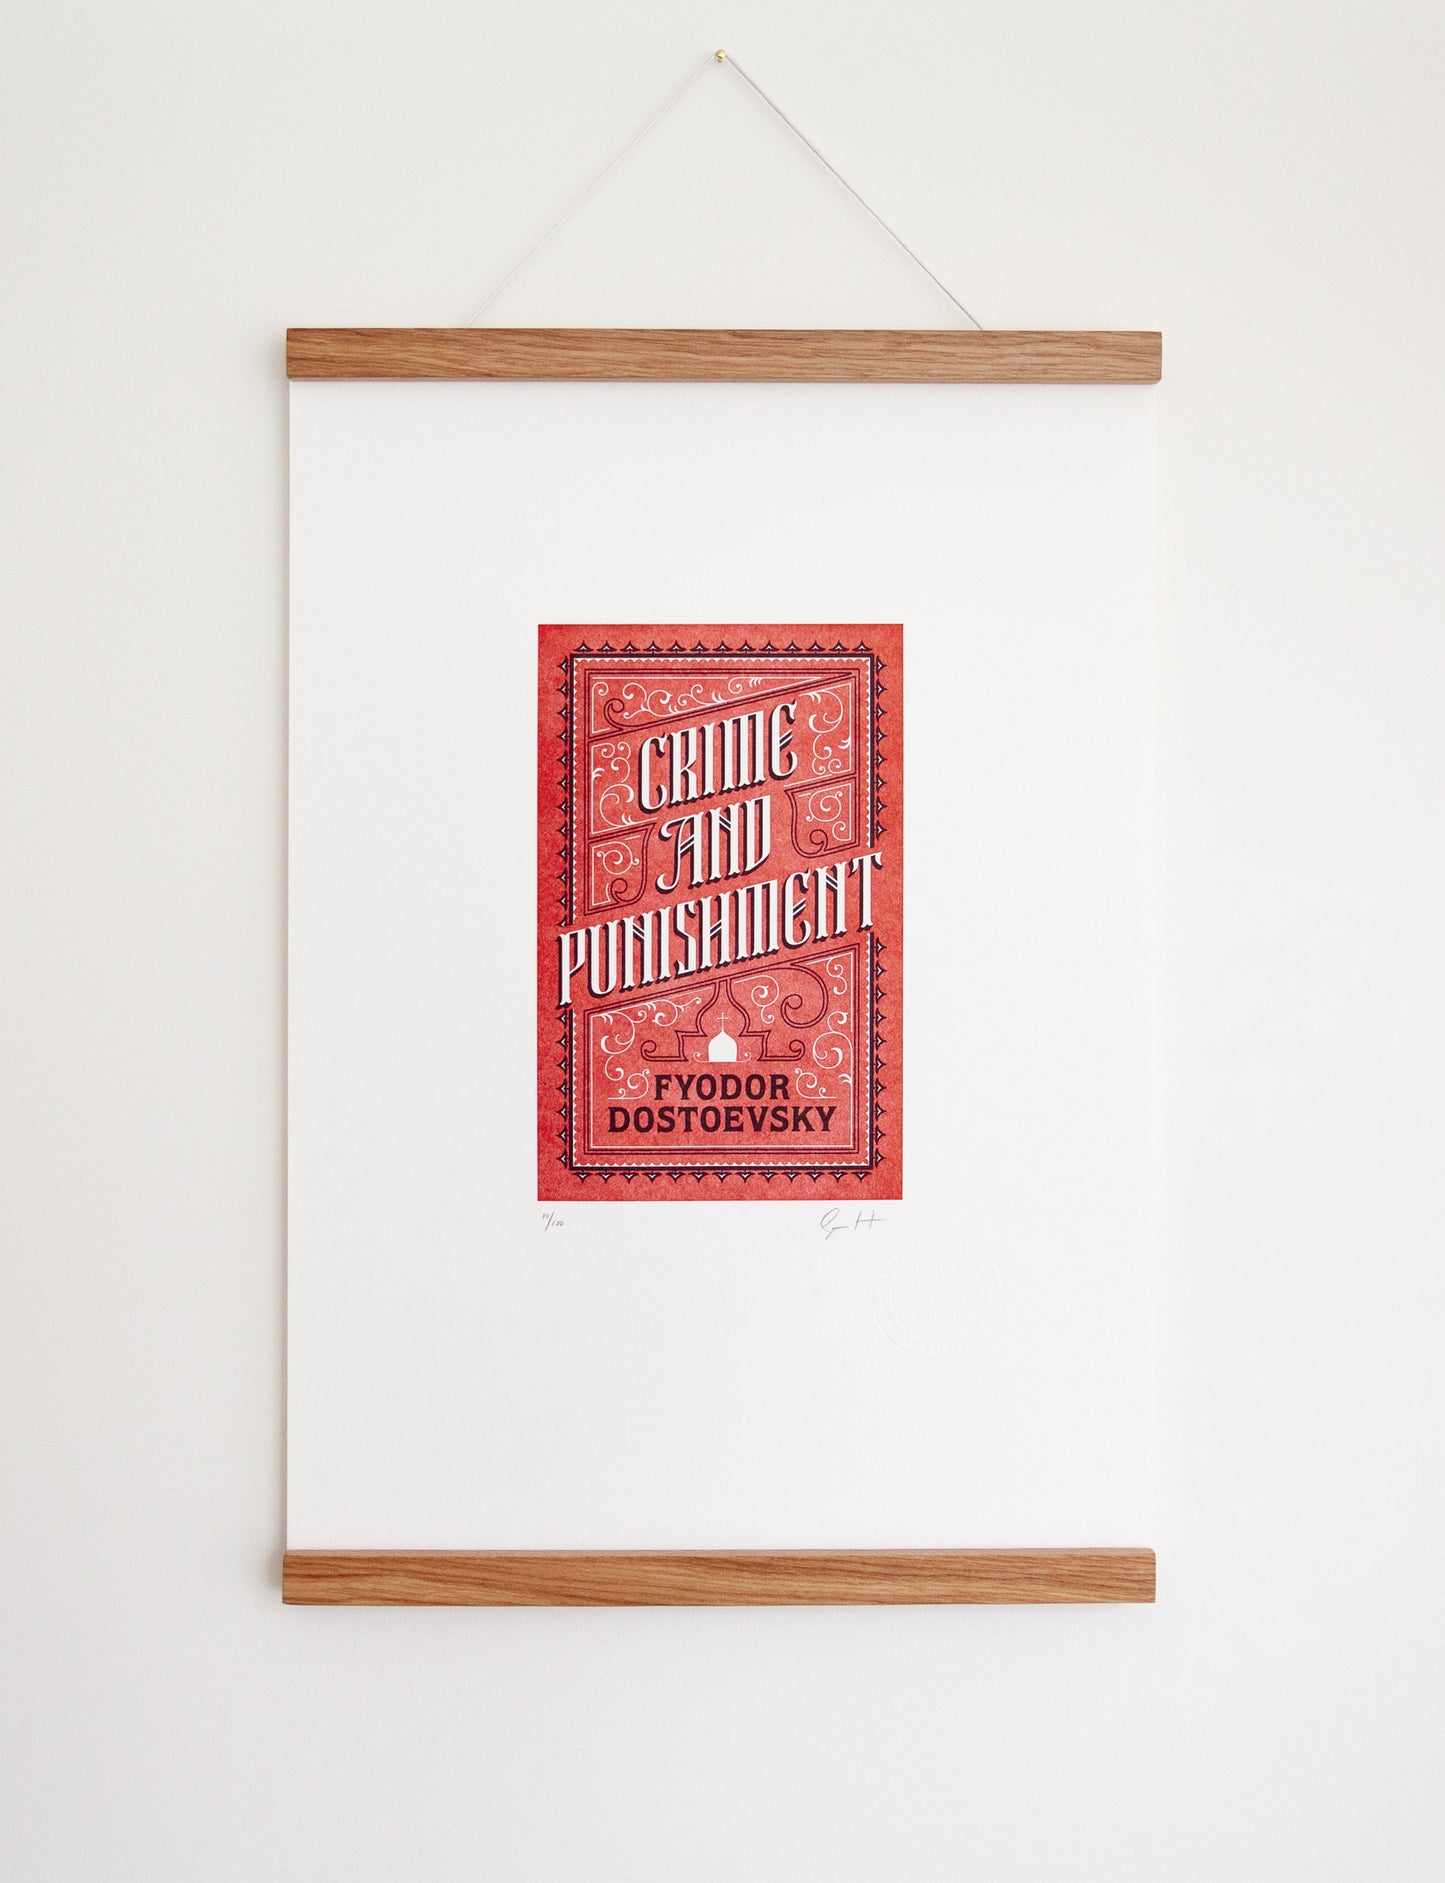 Framed 2-color letterpress print in red and black. Printed artwork is an illustrated book cover of Crime and Punishment including custom hand lettering.